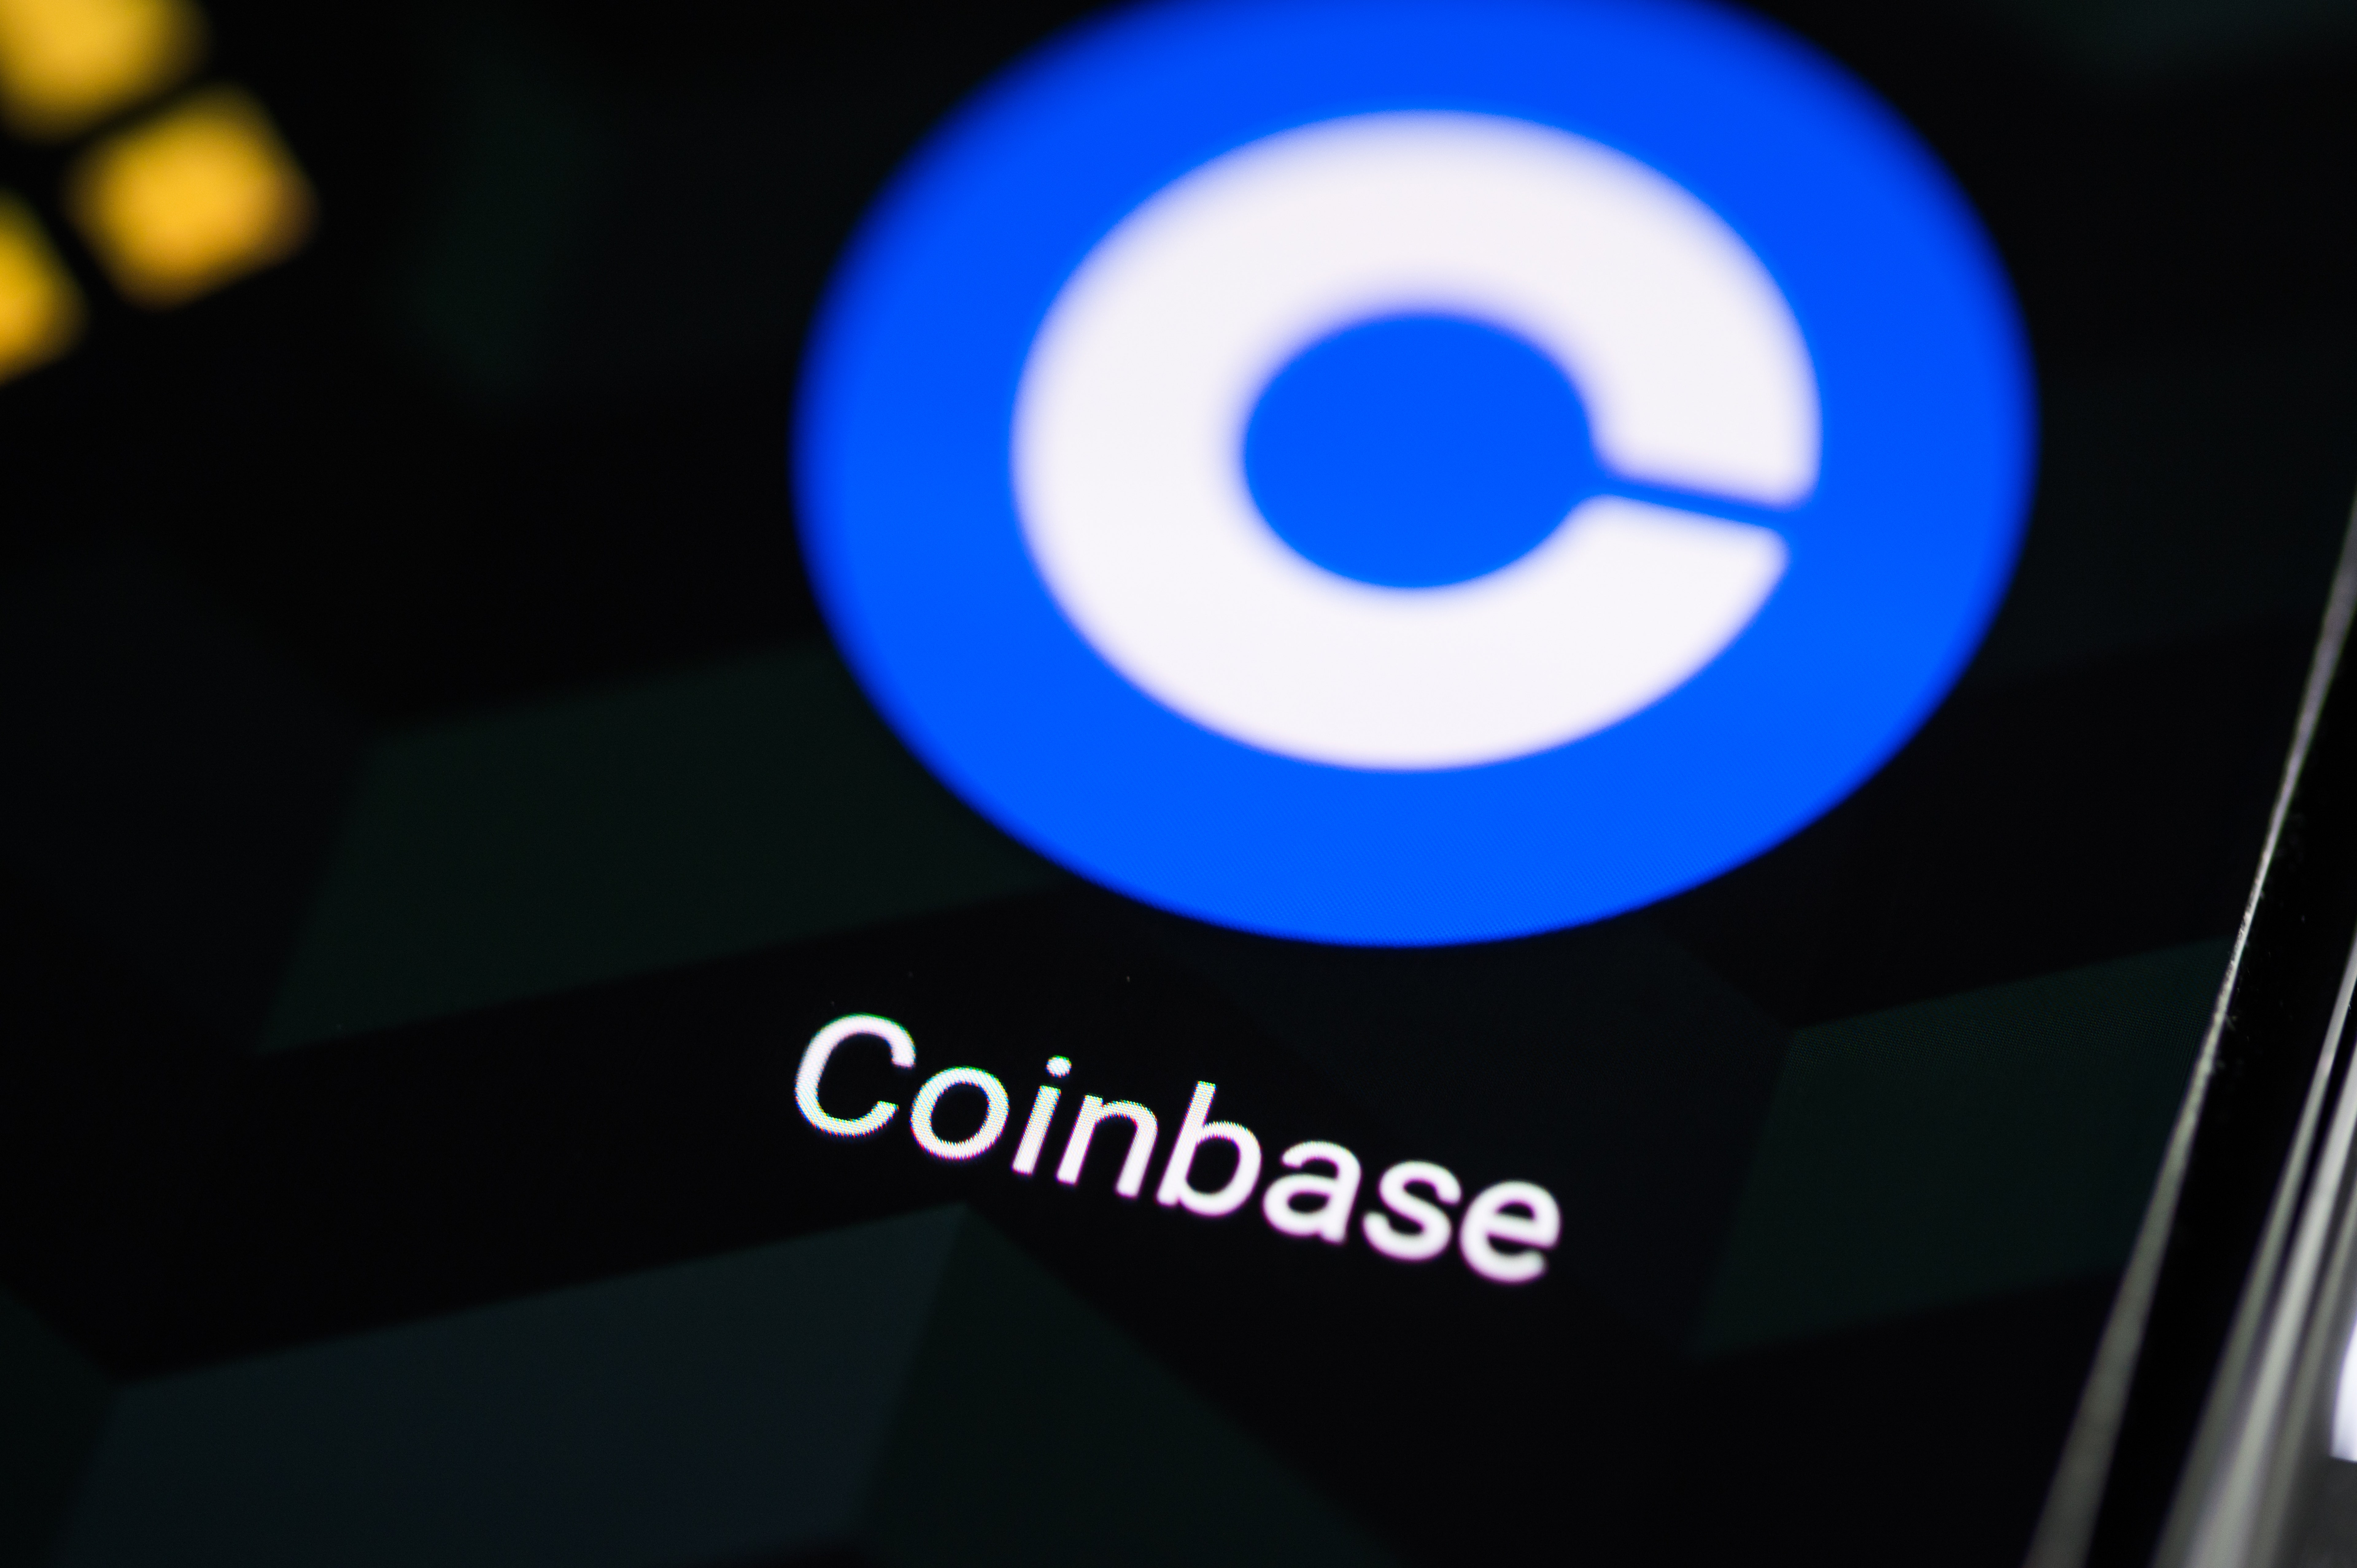 Cathie Wood Puts In Another $29M In Coinbase, Showing Conviction In Crypto Stock Amid Sell-Off